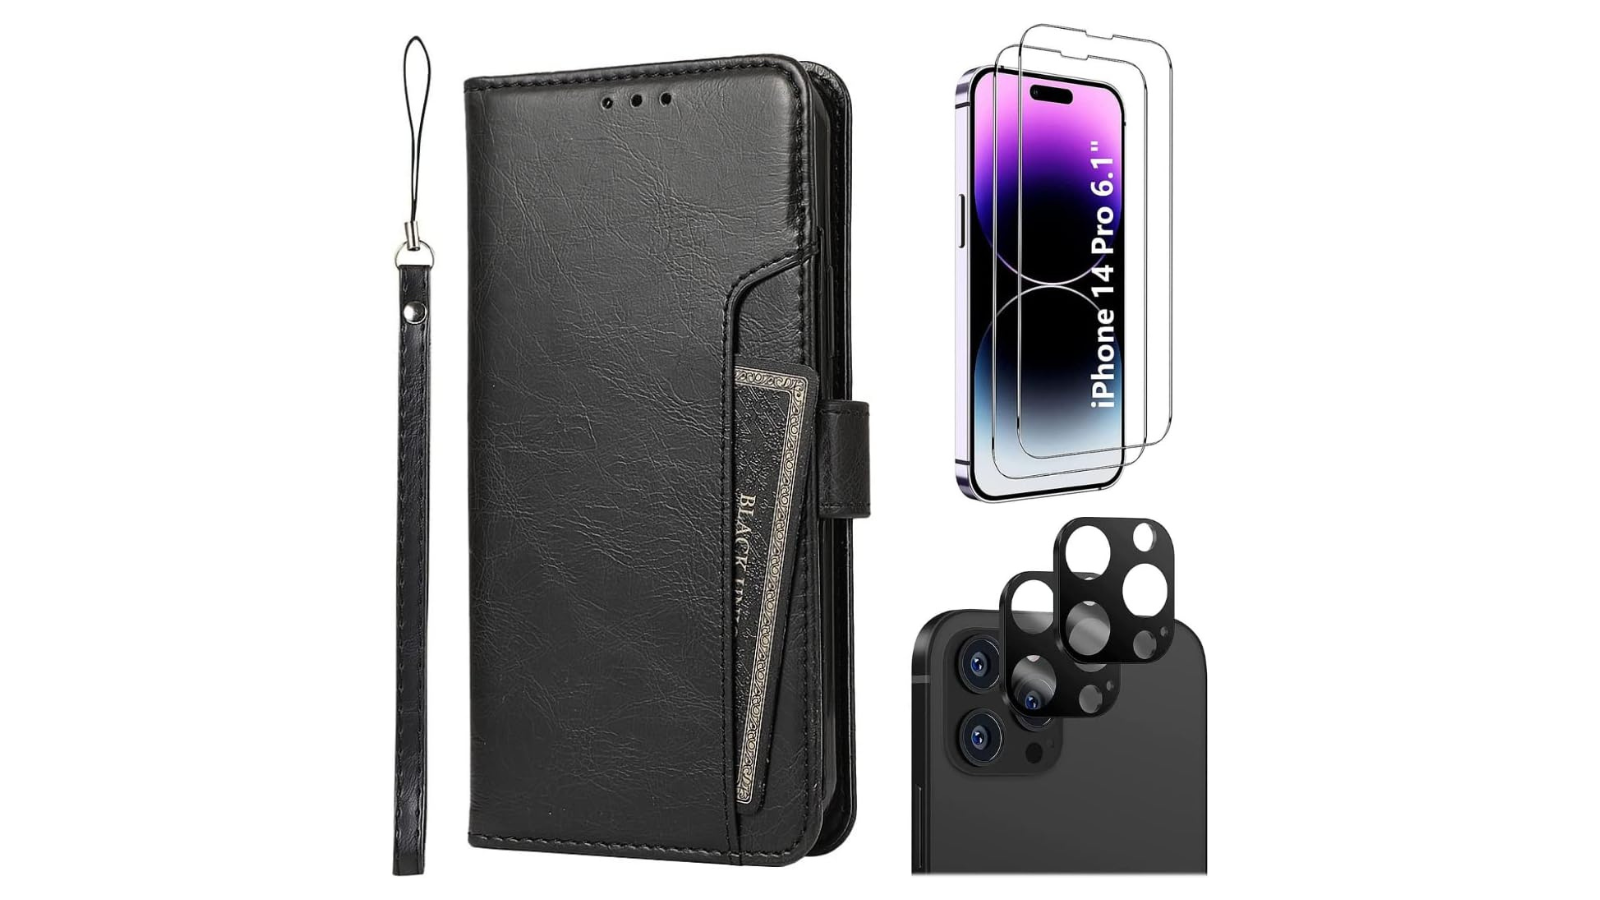 SaharaCase iPhone 14 Pro 6.1-inch Protection Kit Bundle - Folio Wallet Case with Tempered Glass Screen and Camera Protector (Black)